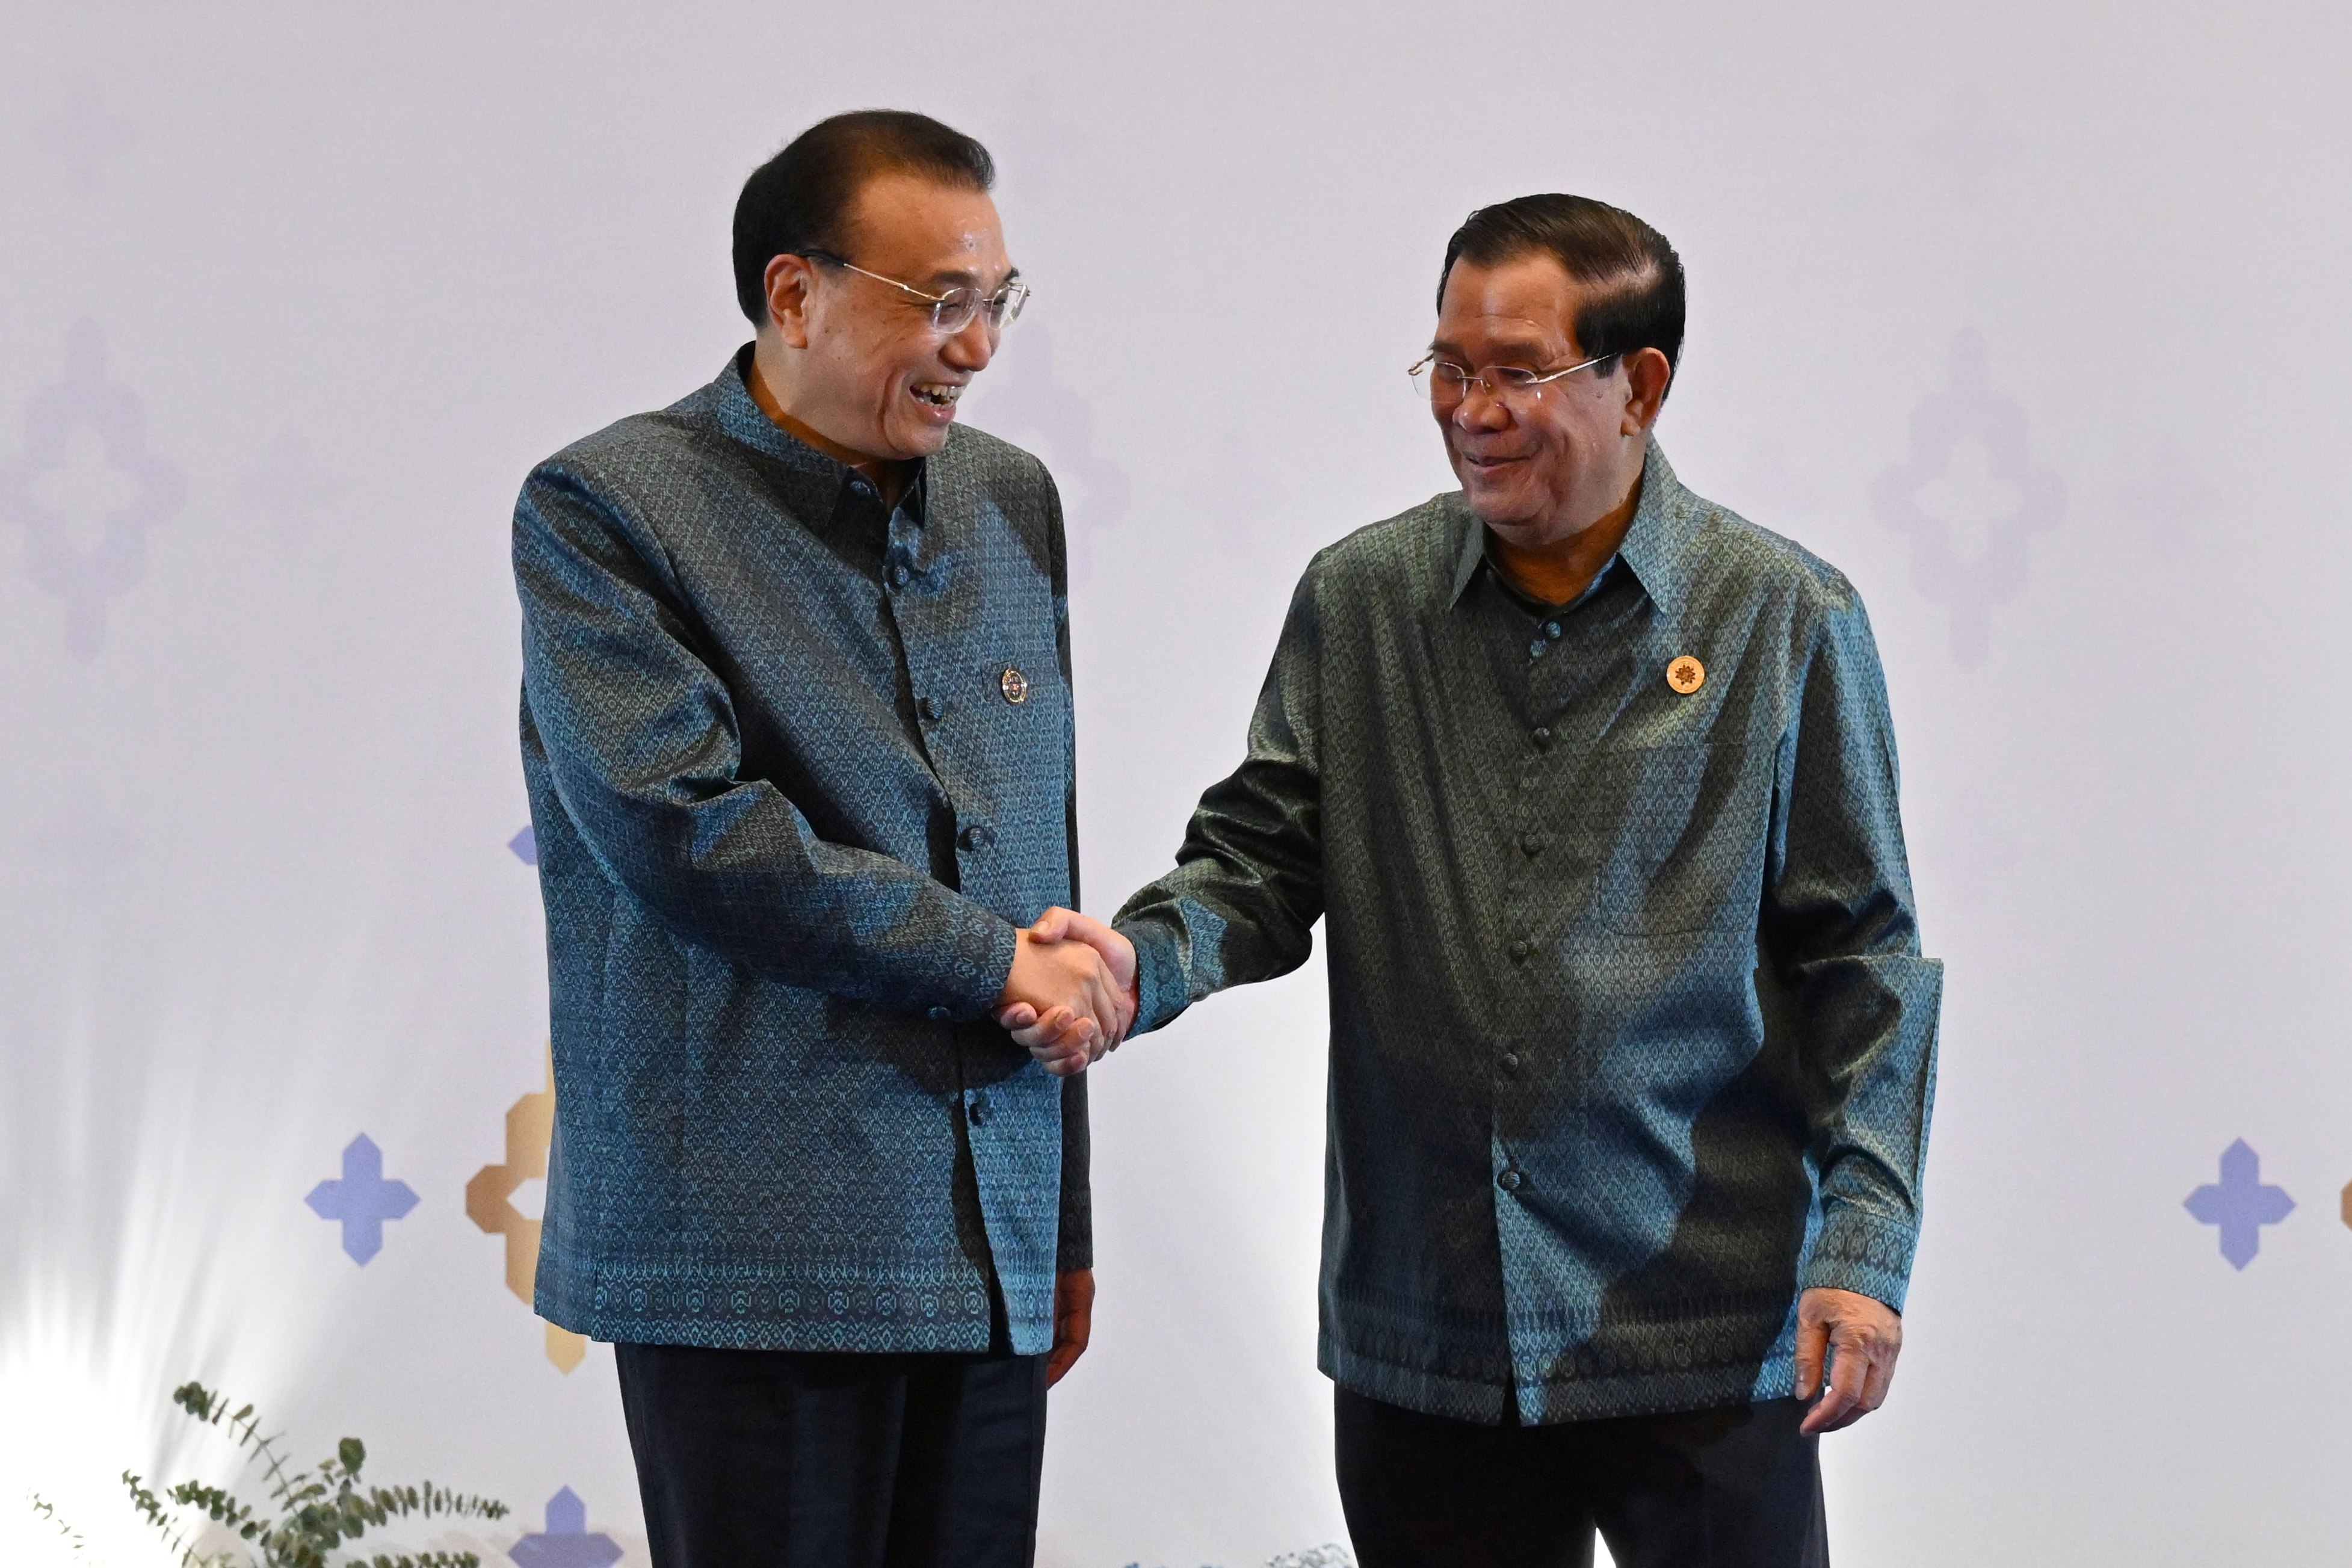 Chinese Premier Li Keqiang shakes hands with Cambodia’s Prime Minister Hun Sen on Saturday during the Association of Southeast Asian Nations Summit in Phnom Penh. Photo: EPA-EFE